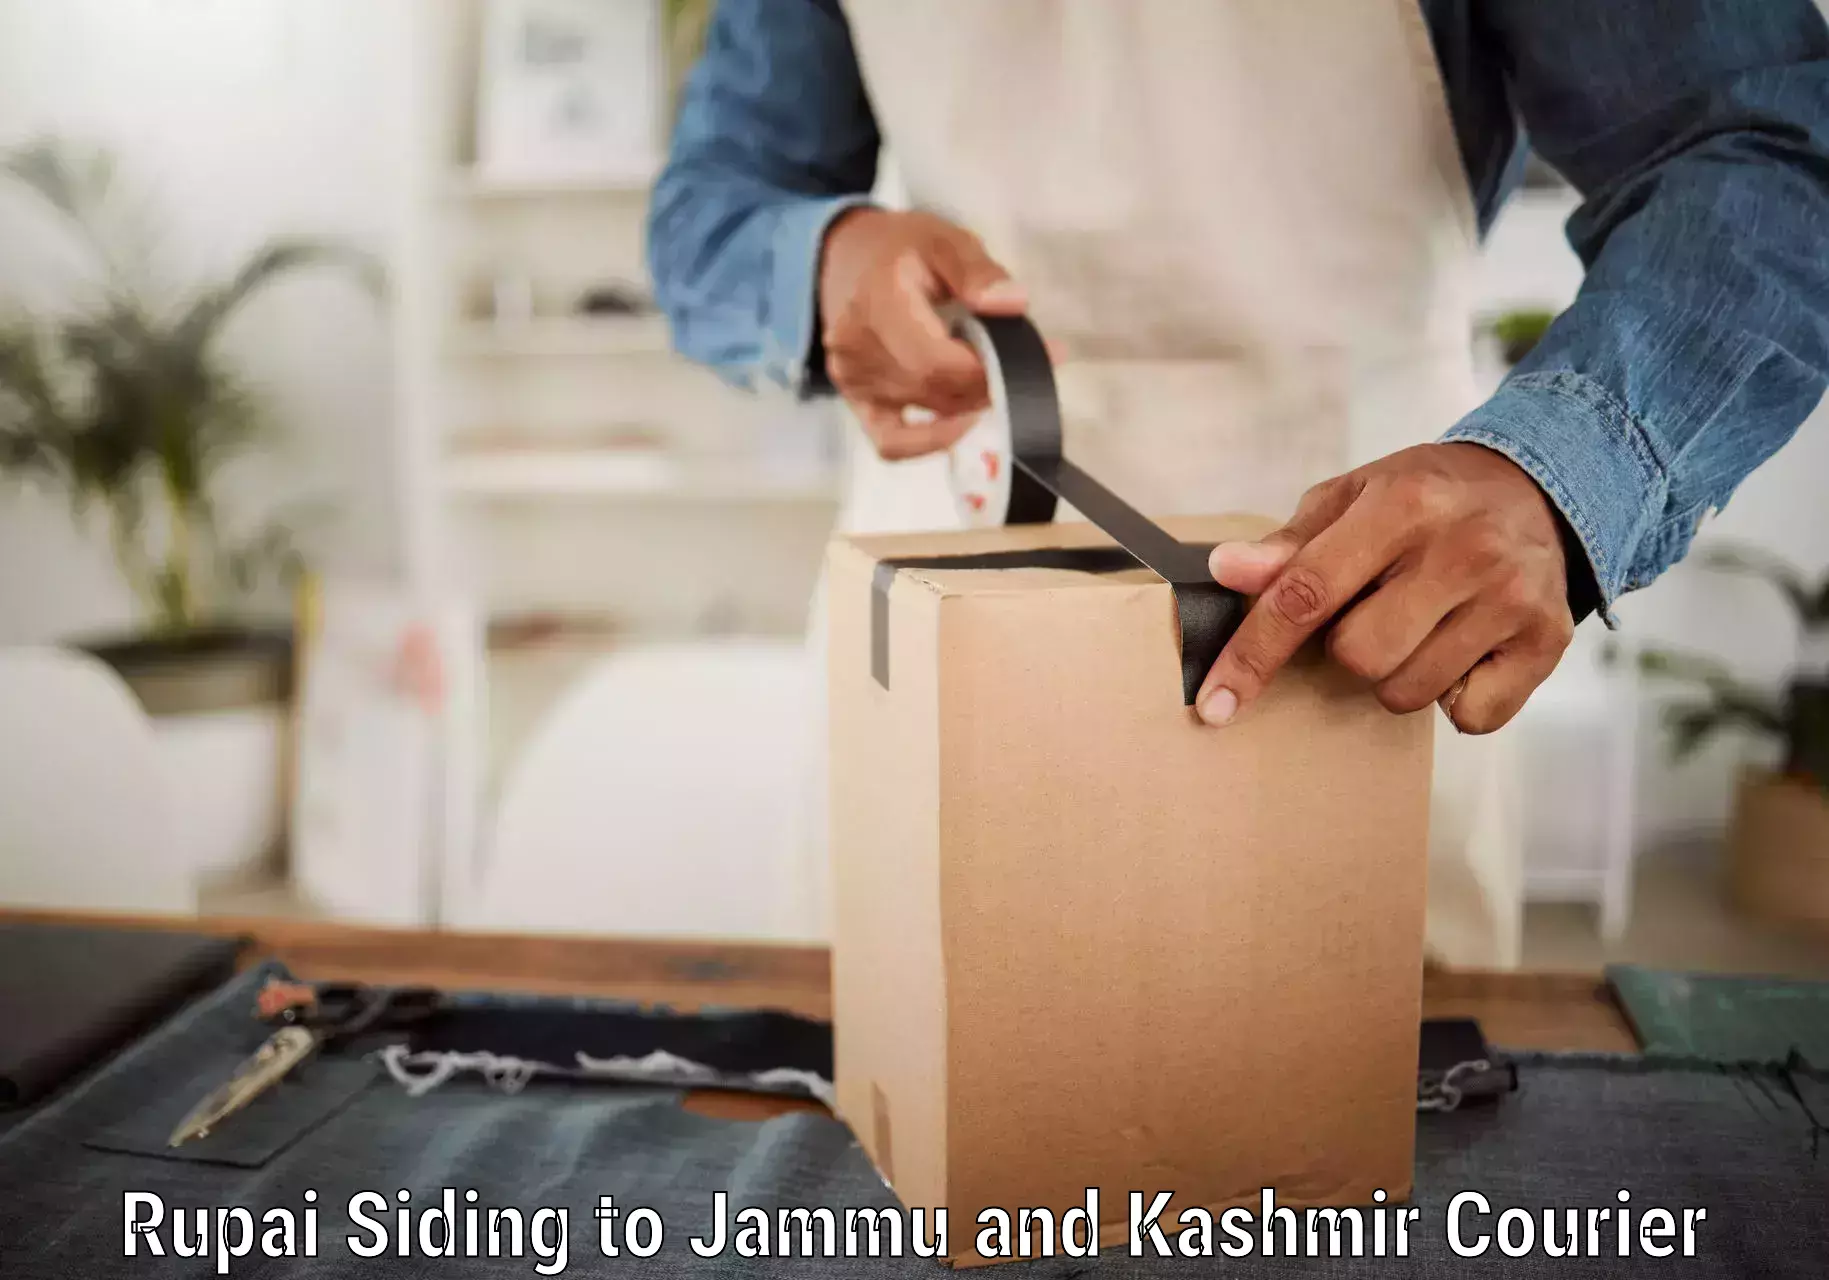 Express package services Rupai Siding to Jammu and Kashmir